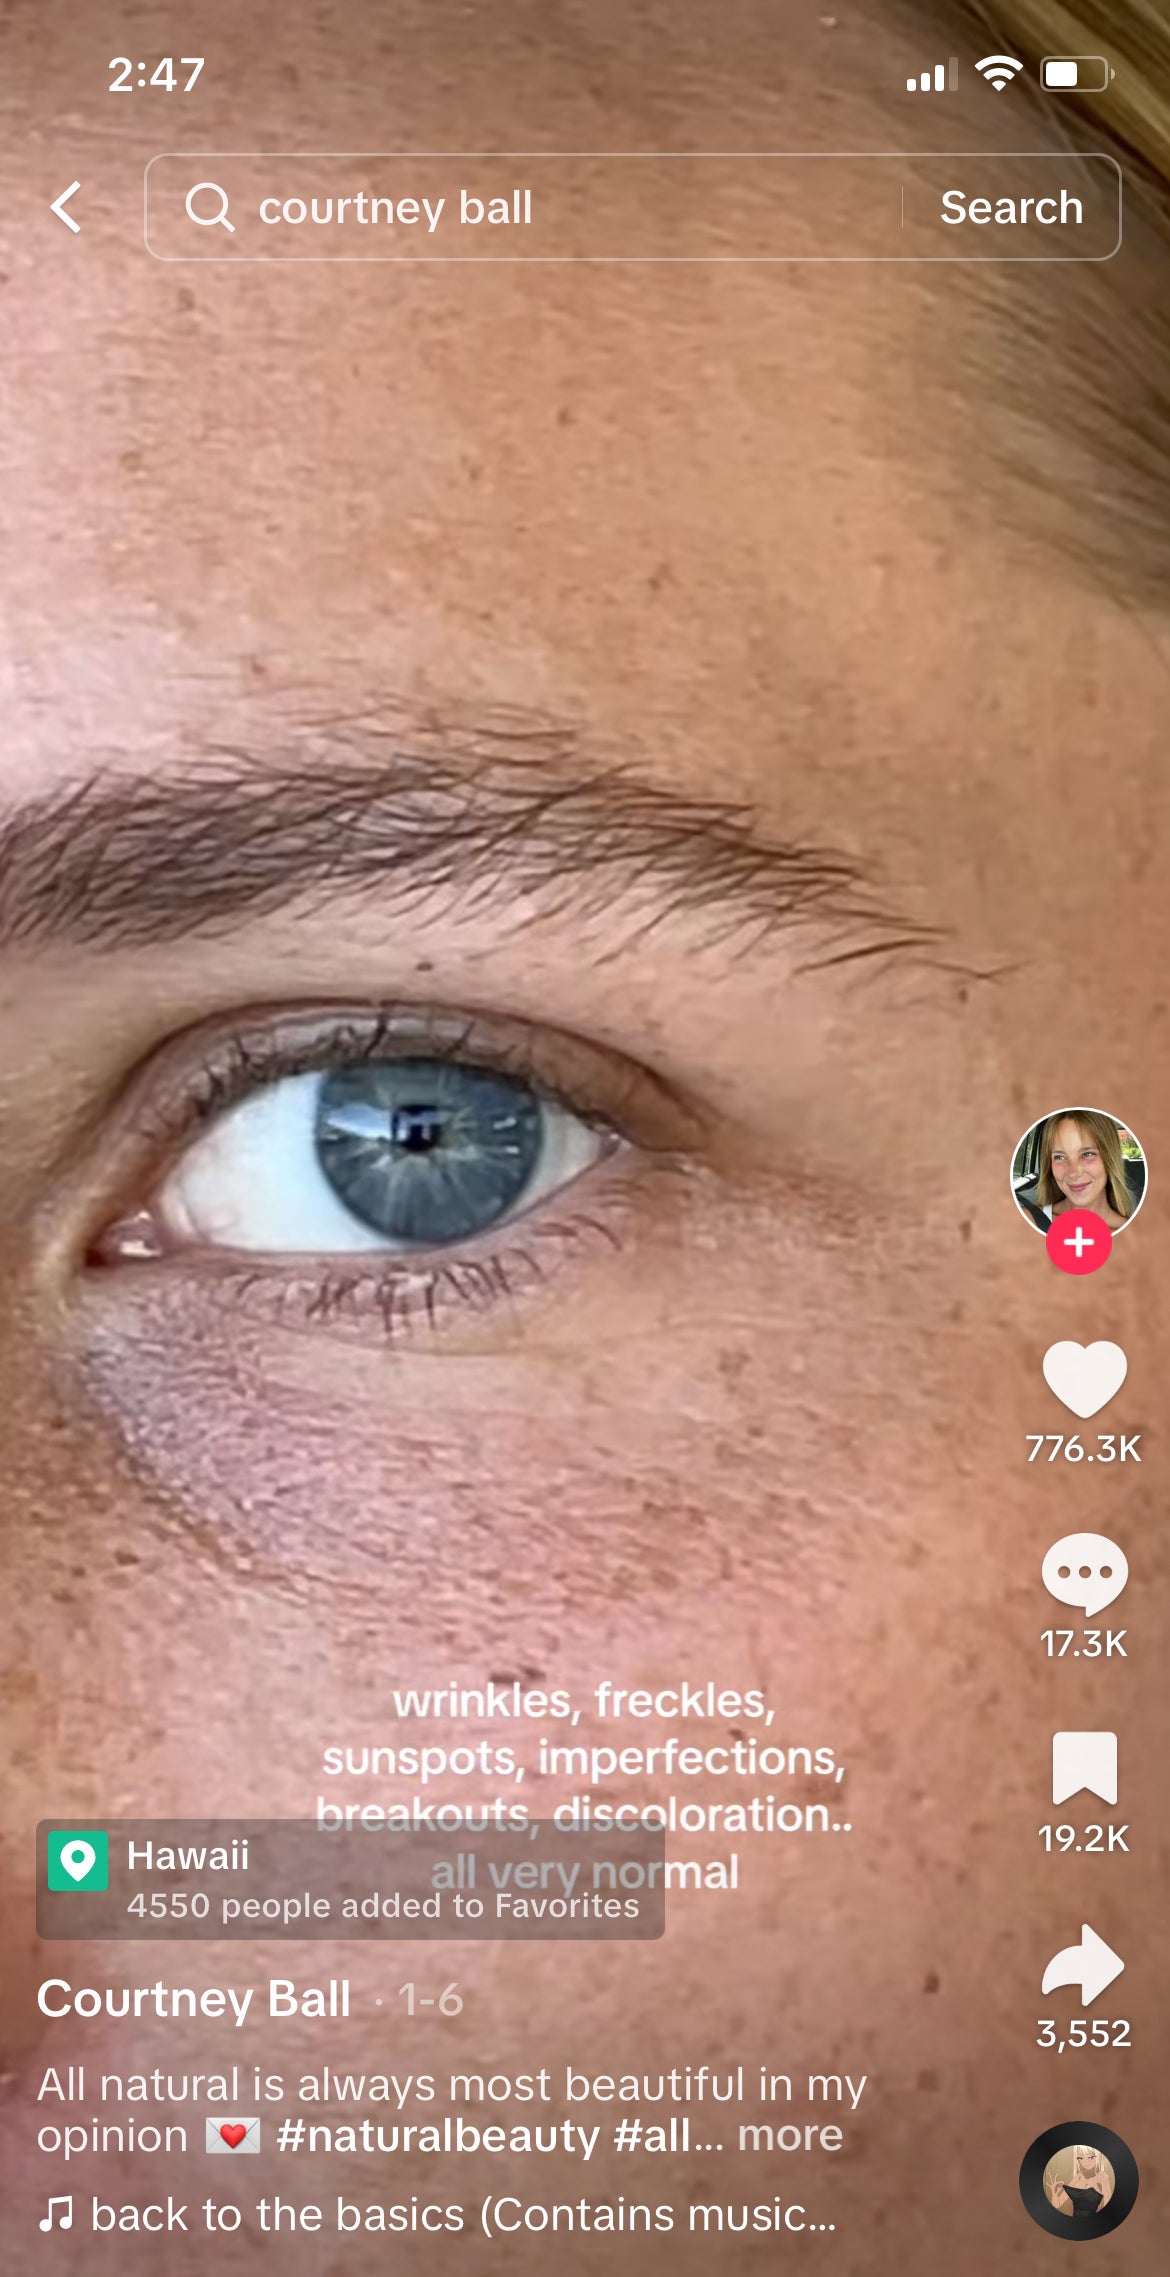 Close-up showing fine lines and freckles around Courtney&#x27;s eye